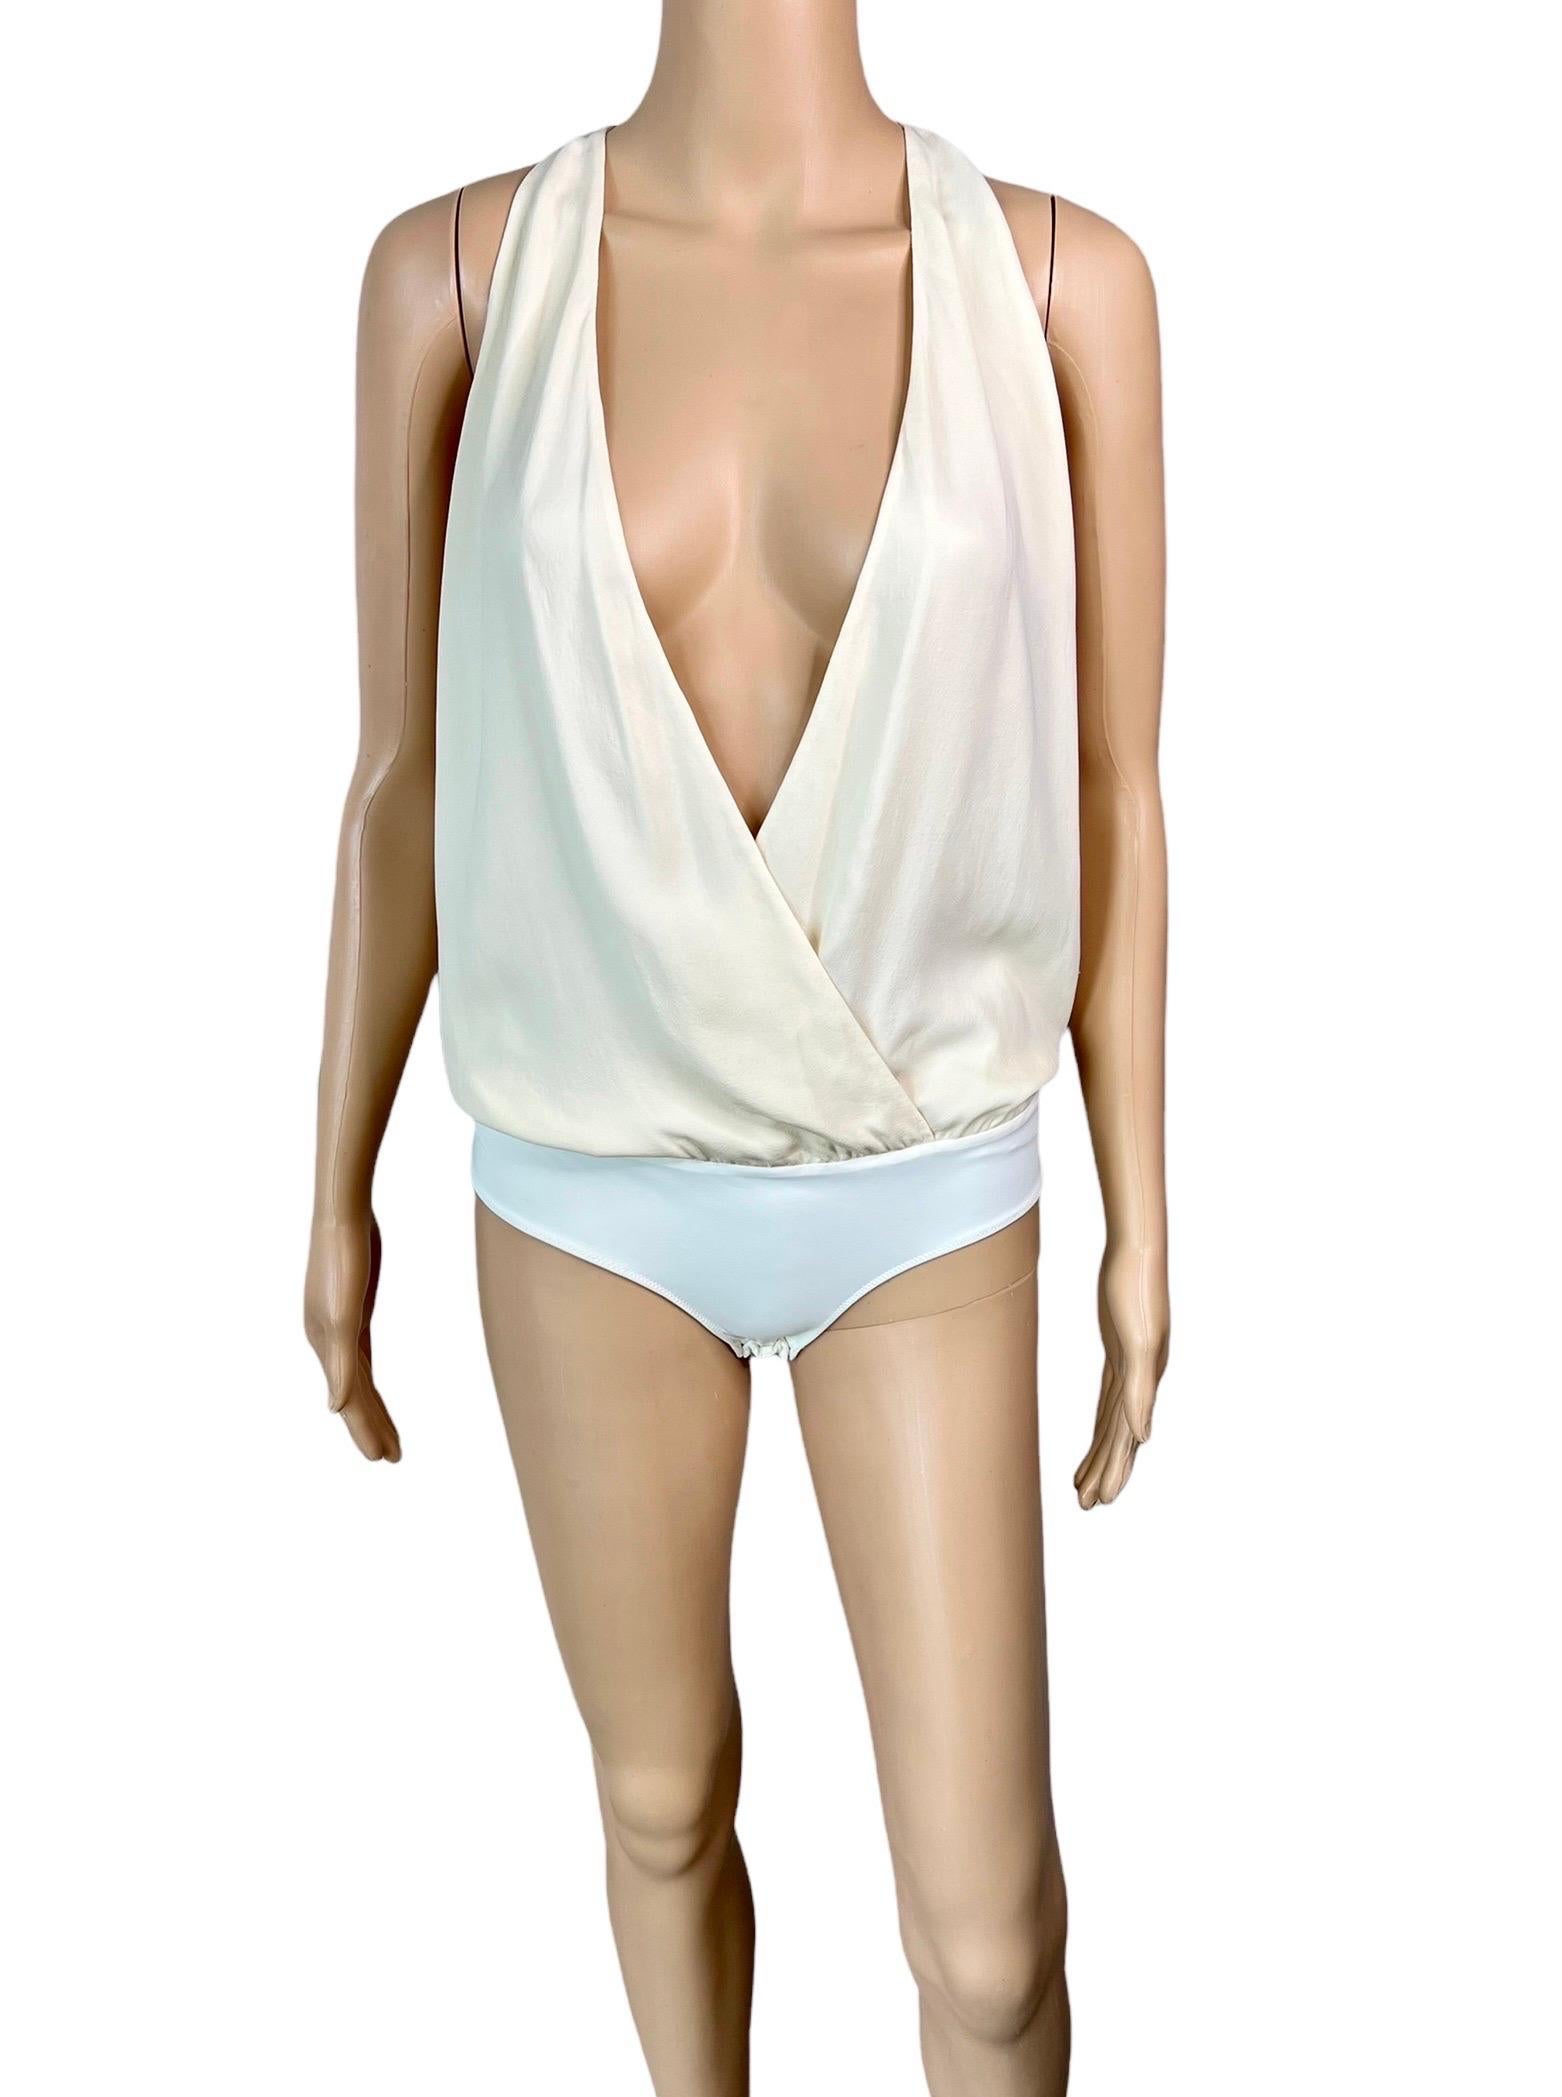 Gucci S/S 2012 Runway Sheer Plunging Neckline Cutout Ivory Bodysuit Top For Sale 2